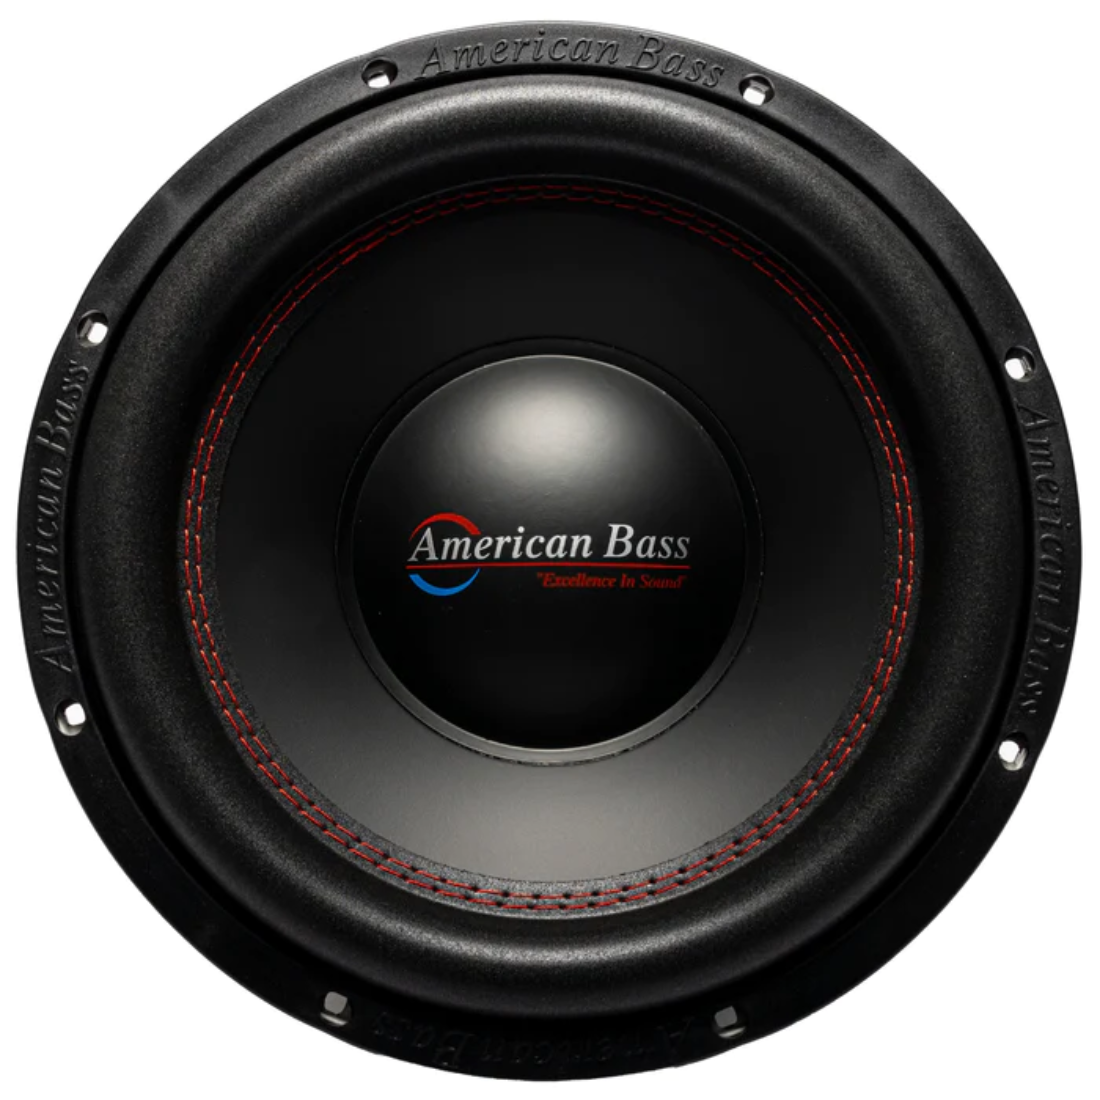 American Bass DX-10 10" 600W Max Single 4-Ohm Voice Coil SVC Car Audio Subwoofer